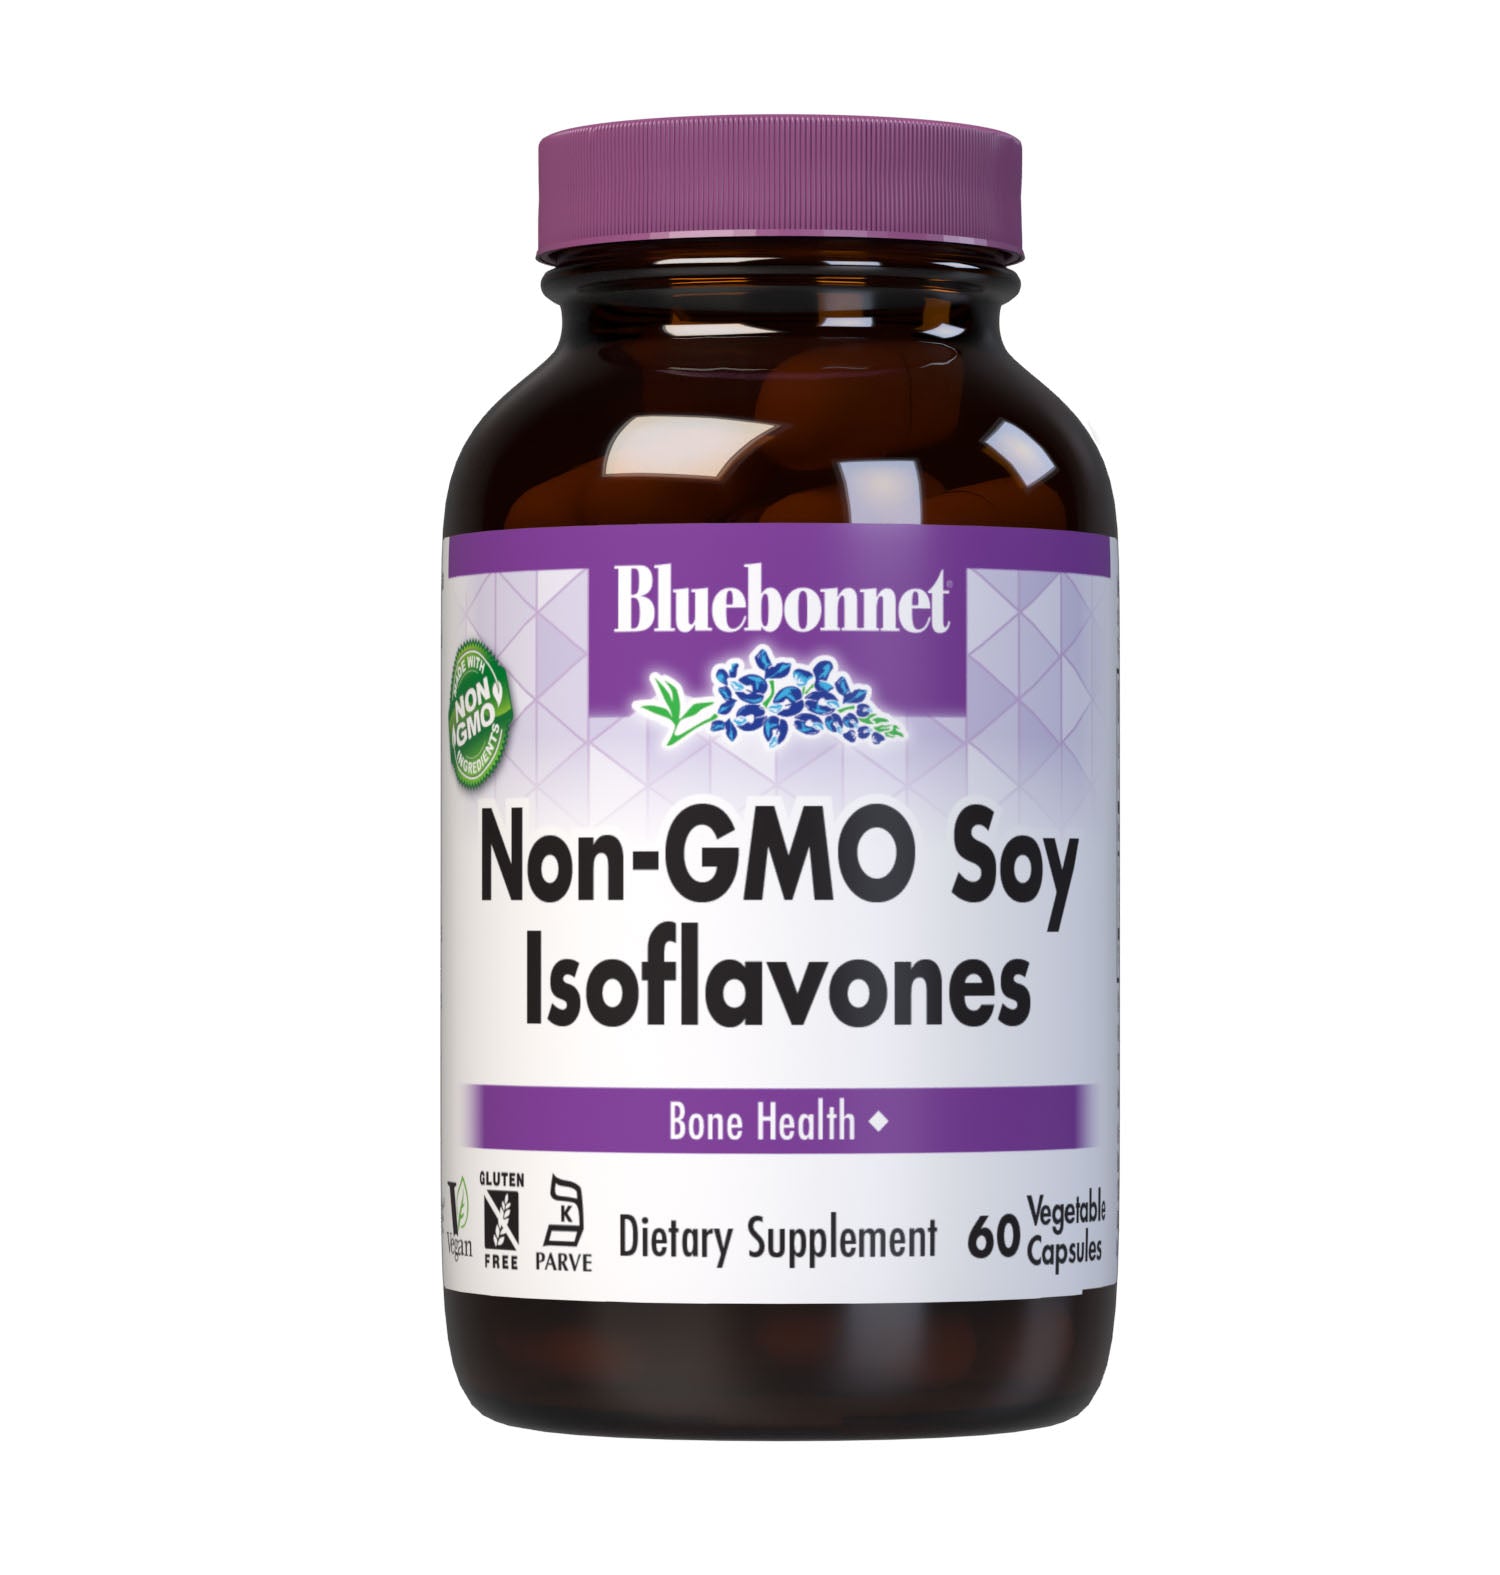 Bluebonnet’s Non-GMO Soy Isoflavones 60 Vegetable capsules contain isoflavones from non-GMO soybeans. This unique phytoestrogen formula supplies a concentrated source of genistein, daidzein and glycitein.  #size_60 count